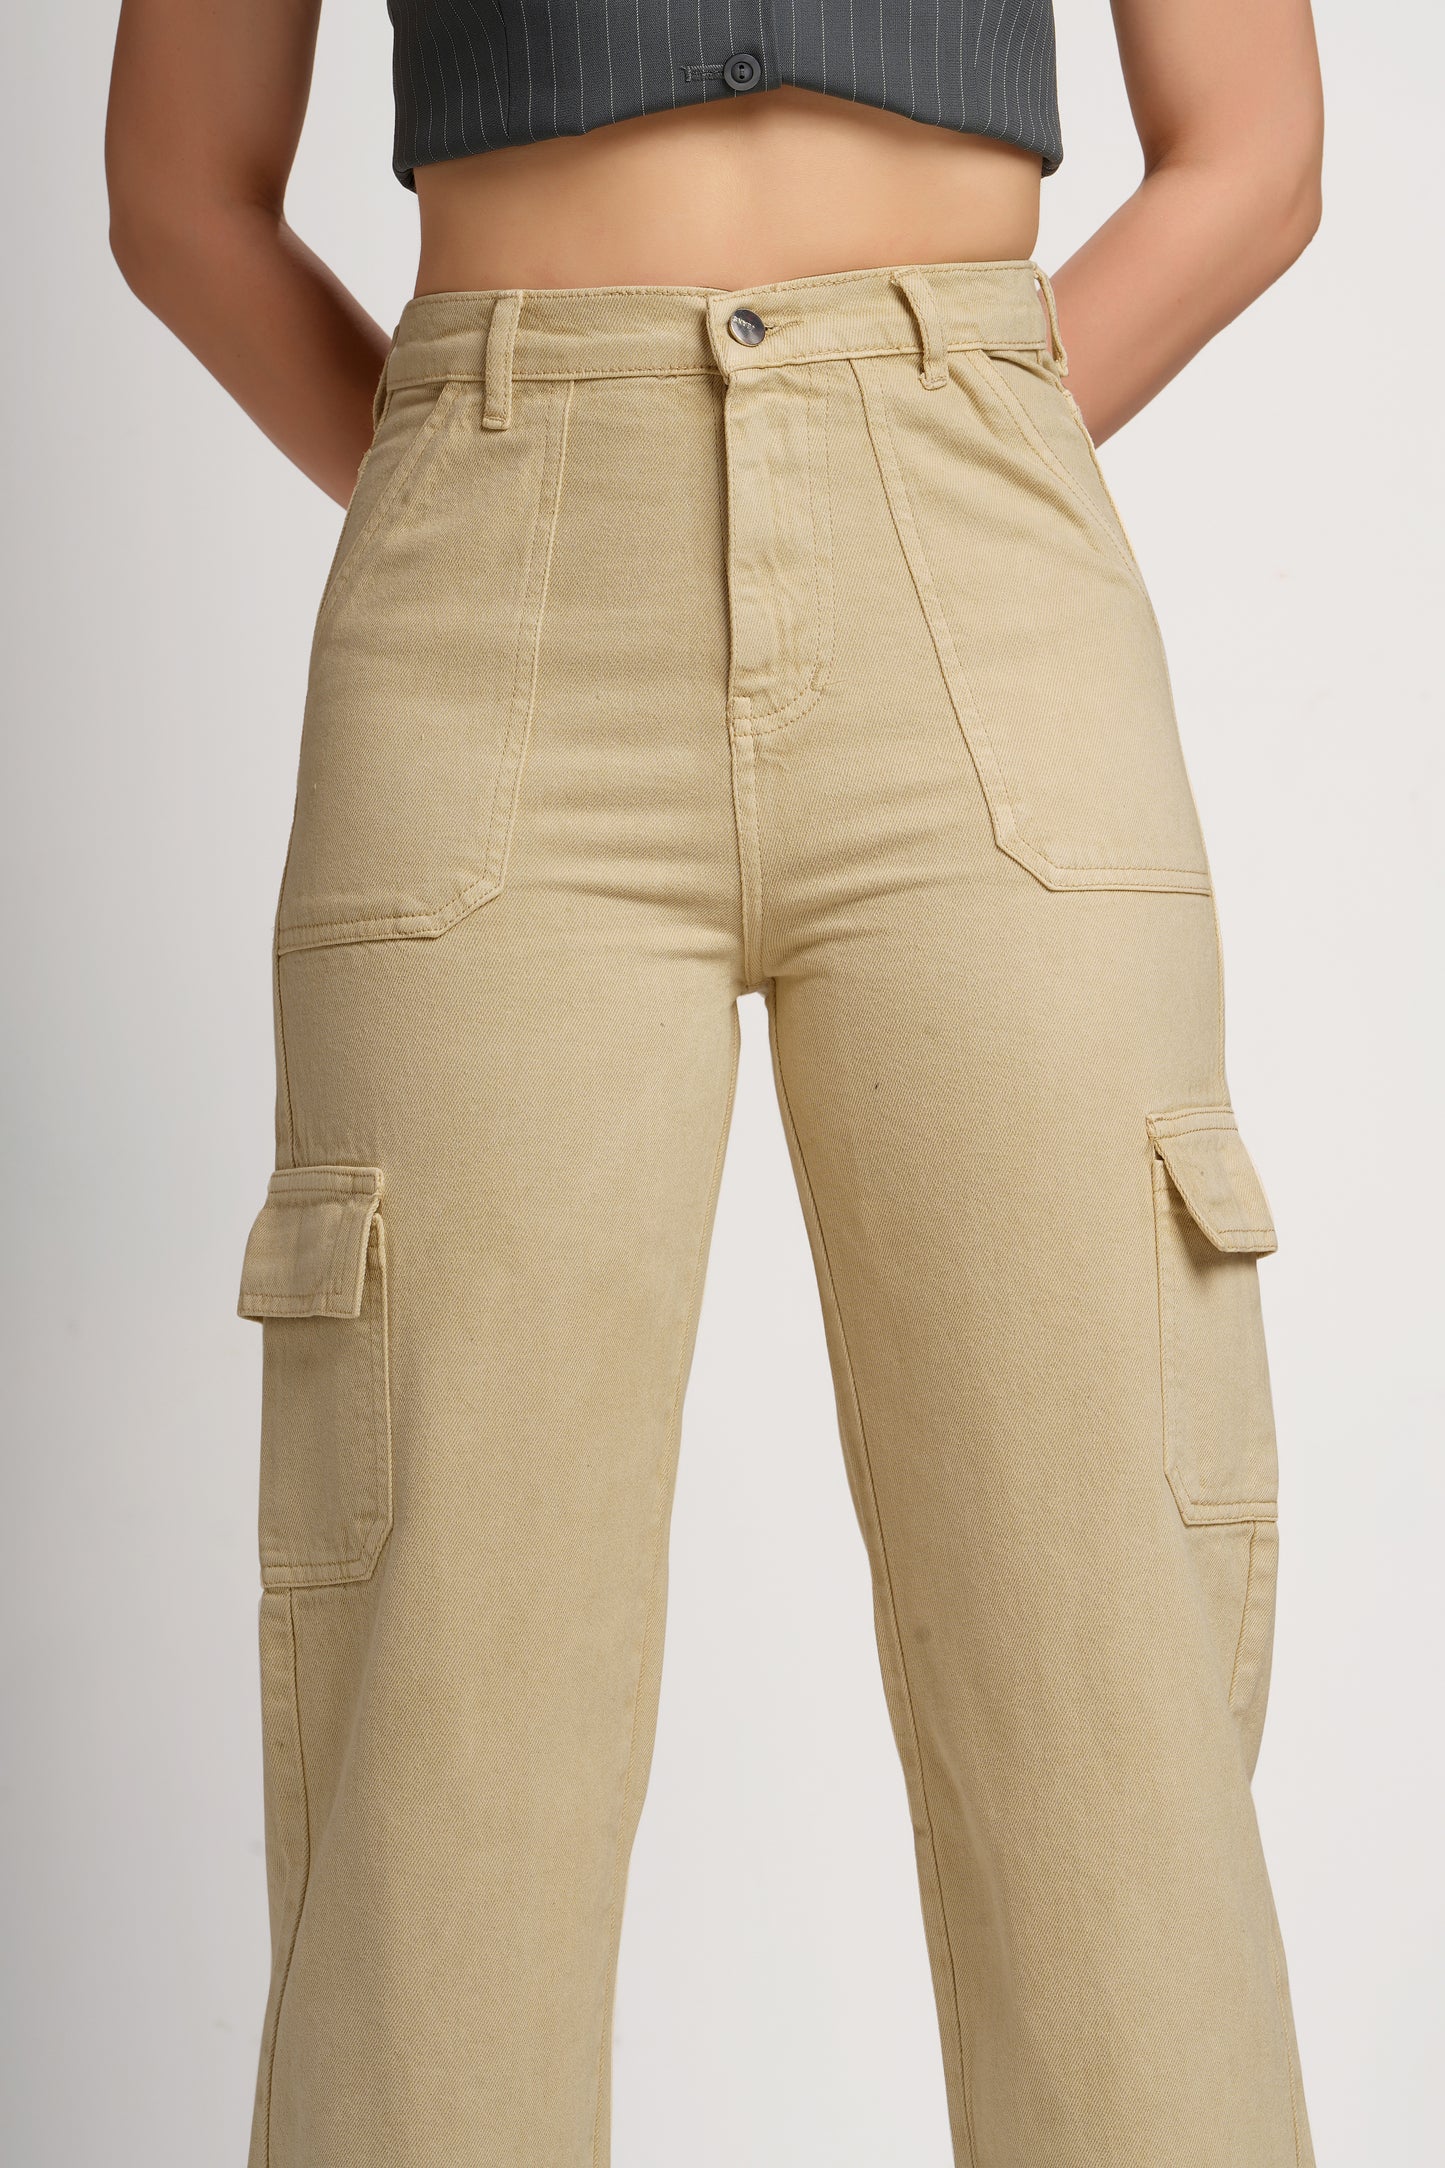 MeQueen Women Desert Sand Loose Fit Cargo Jeans with Flap Pockets